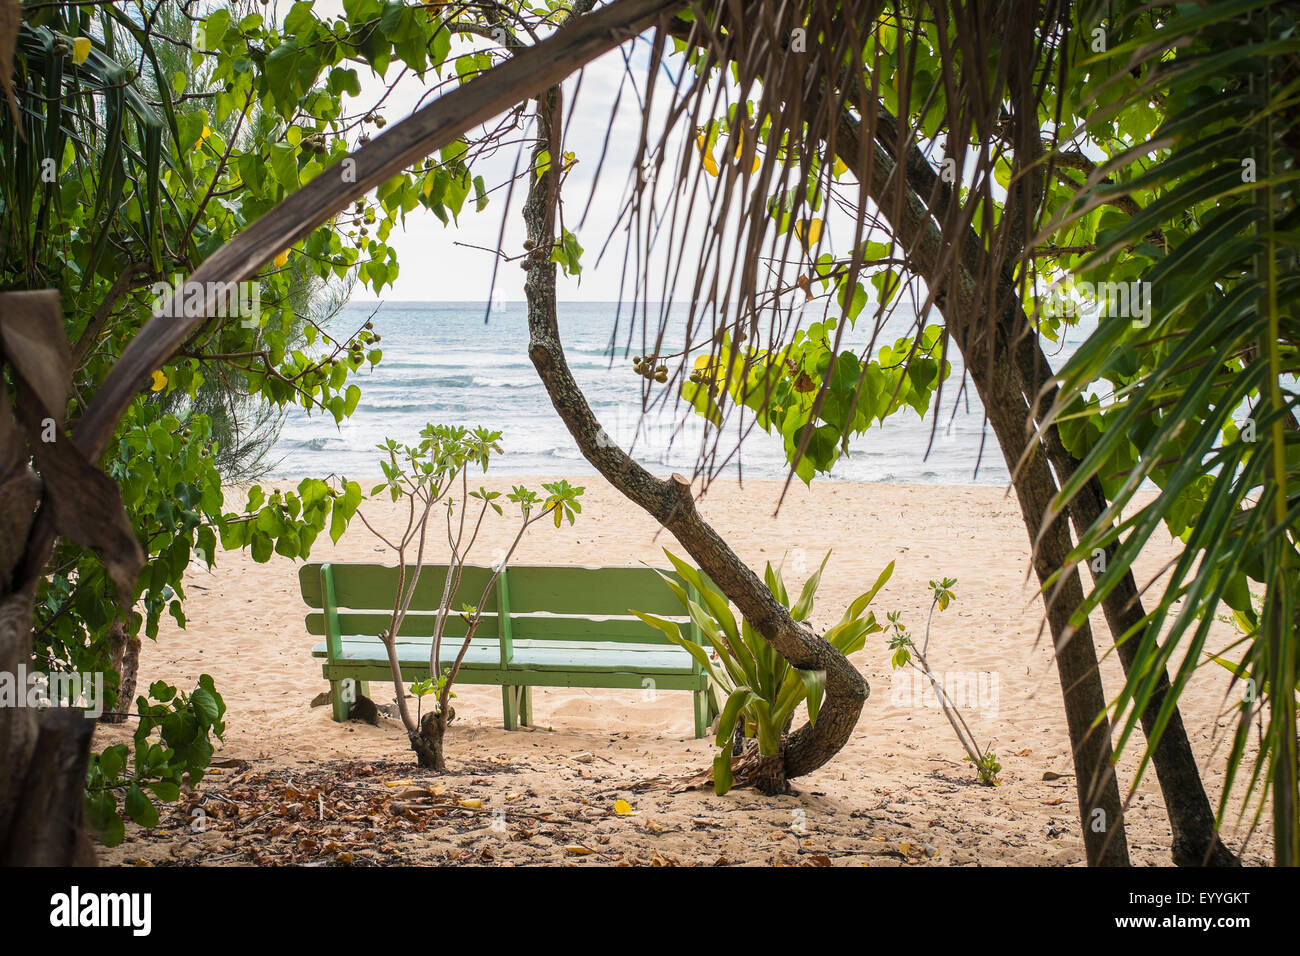 Empty bench and trees on beach Stock Photo